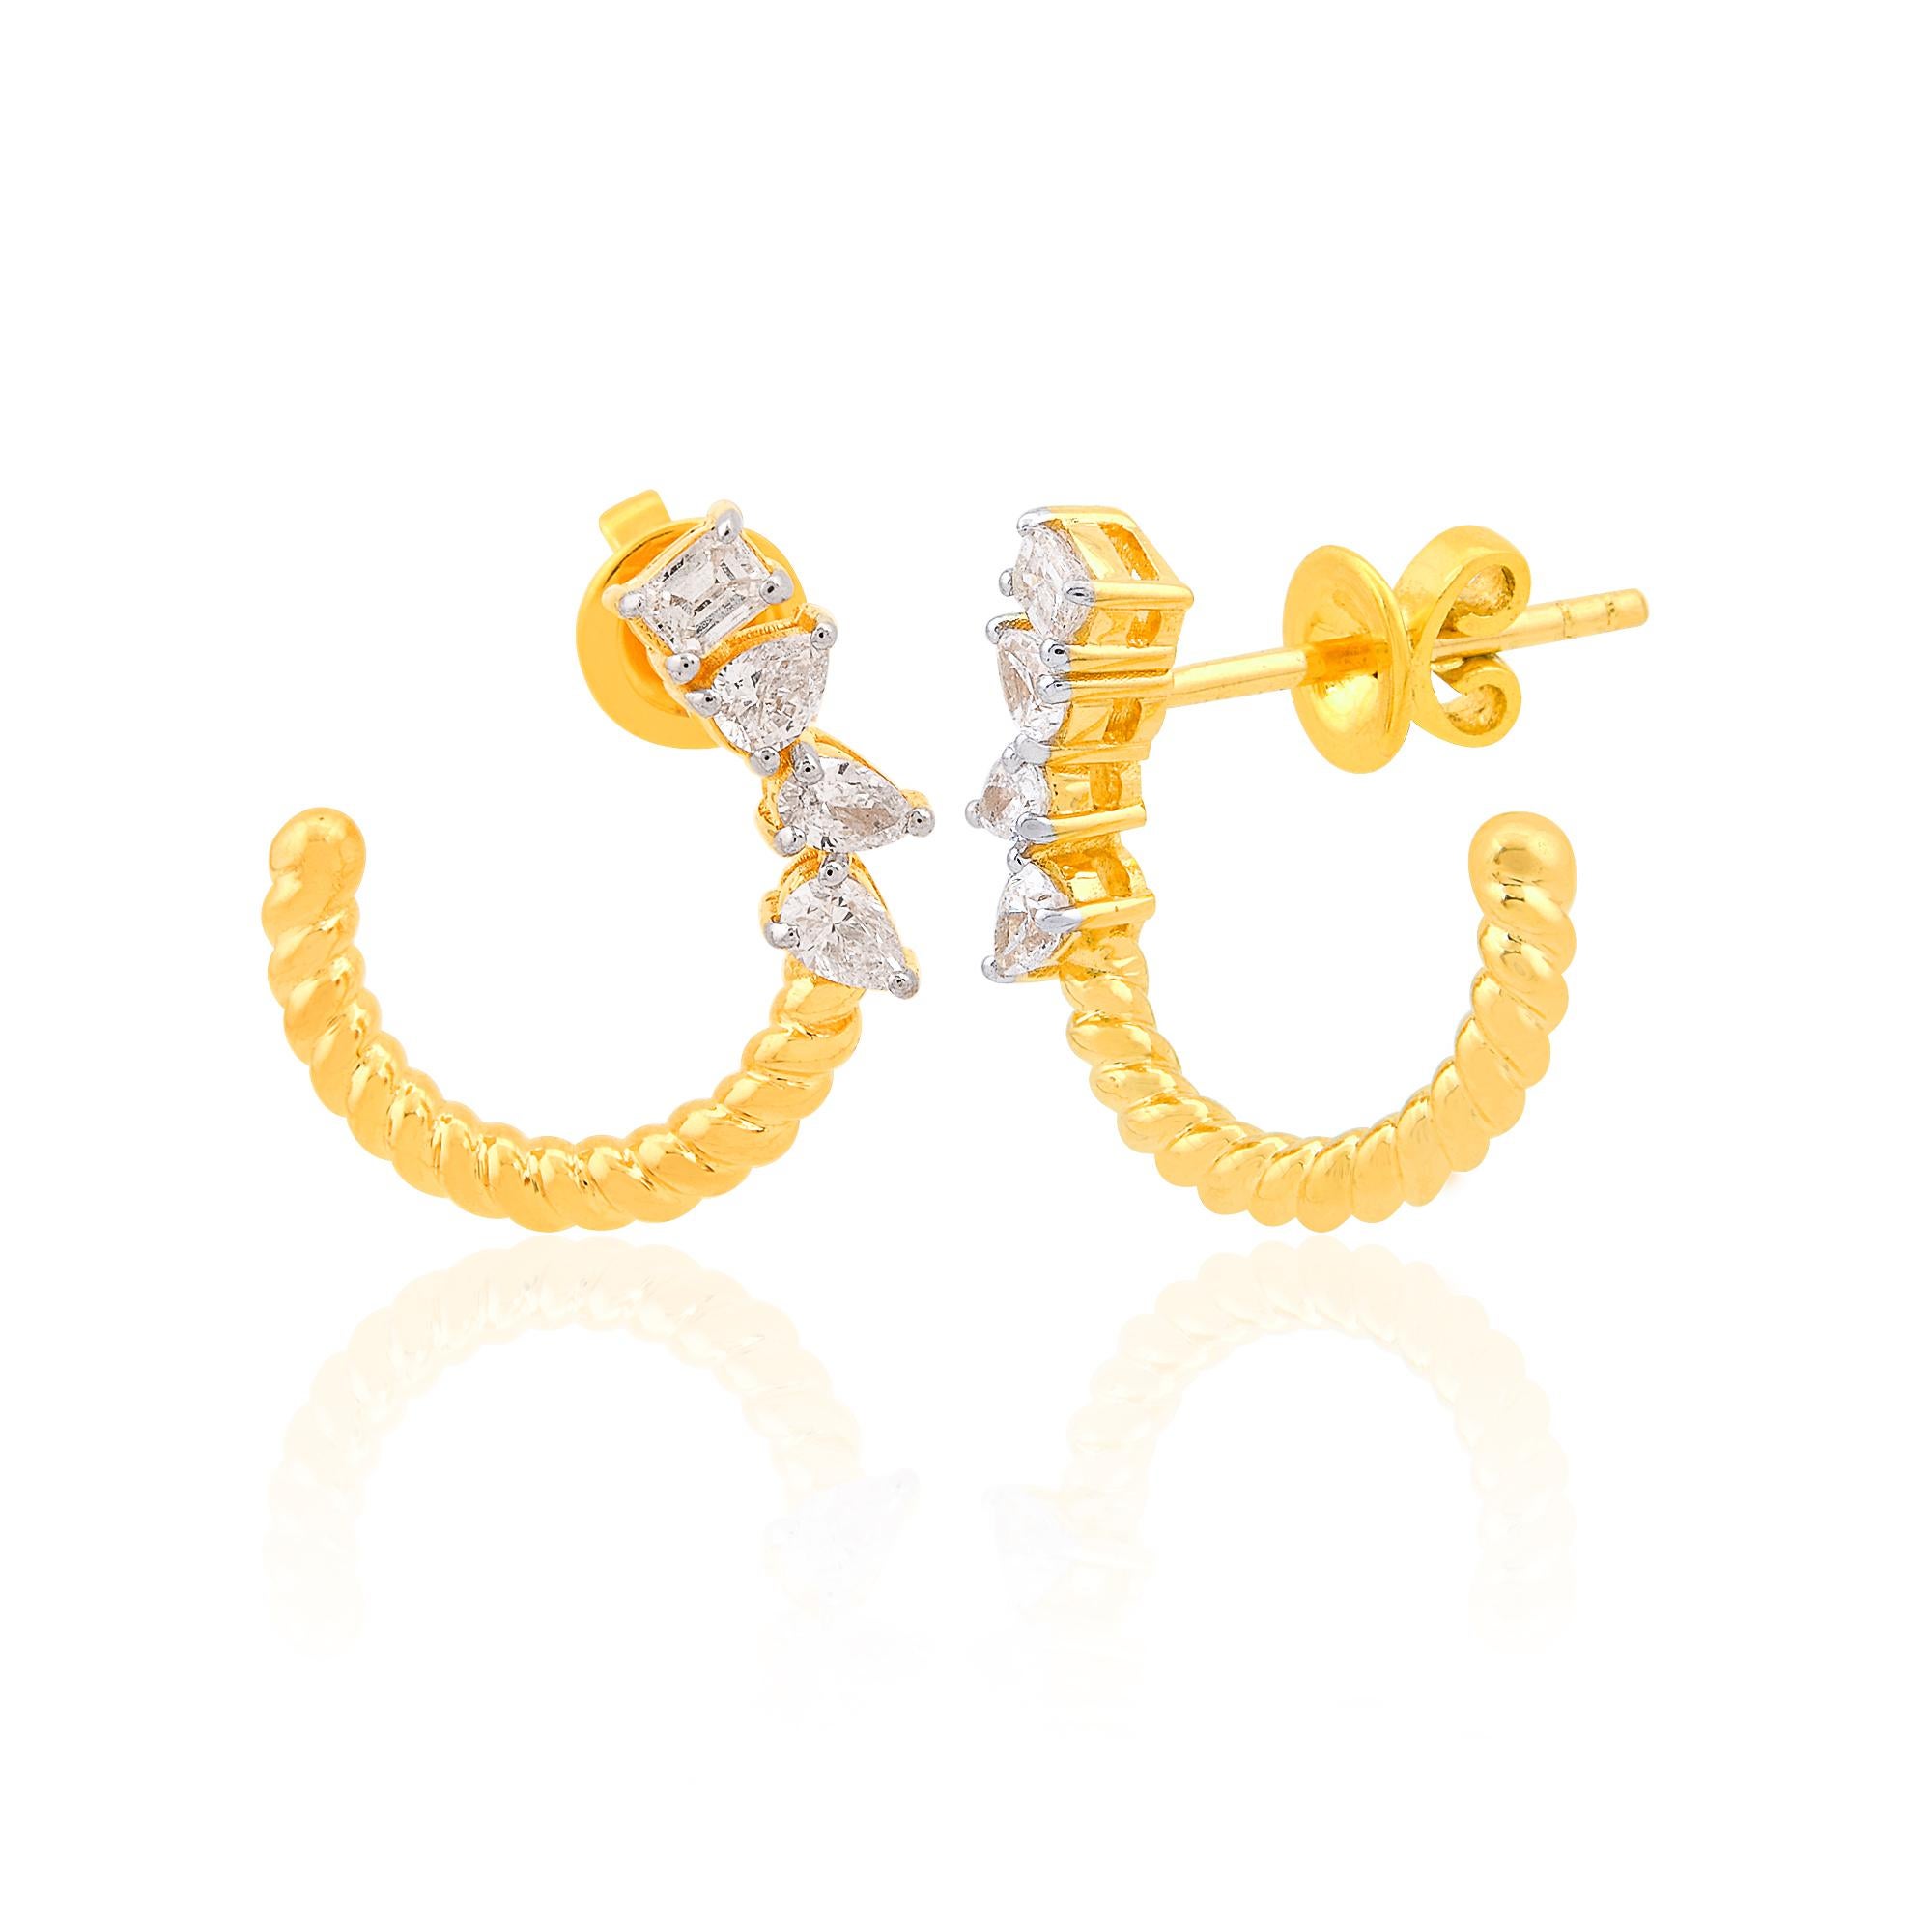 Item Code :- SEE-1951C
Gross Wt. :- 4.05 gm
18k Solid Yellow Gold Wt. :- 3.95 gm
Natural Diamond Wt. :- 0.51 Ct. ( AVERAGE DIAMOND CLARITY SI1-SI2 & COLOR H-I )
Earrings Size :- 16 mm approx.

✦ Sizing
.....................
We can adjust most items